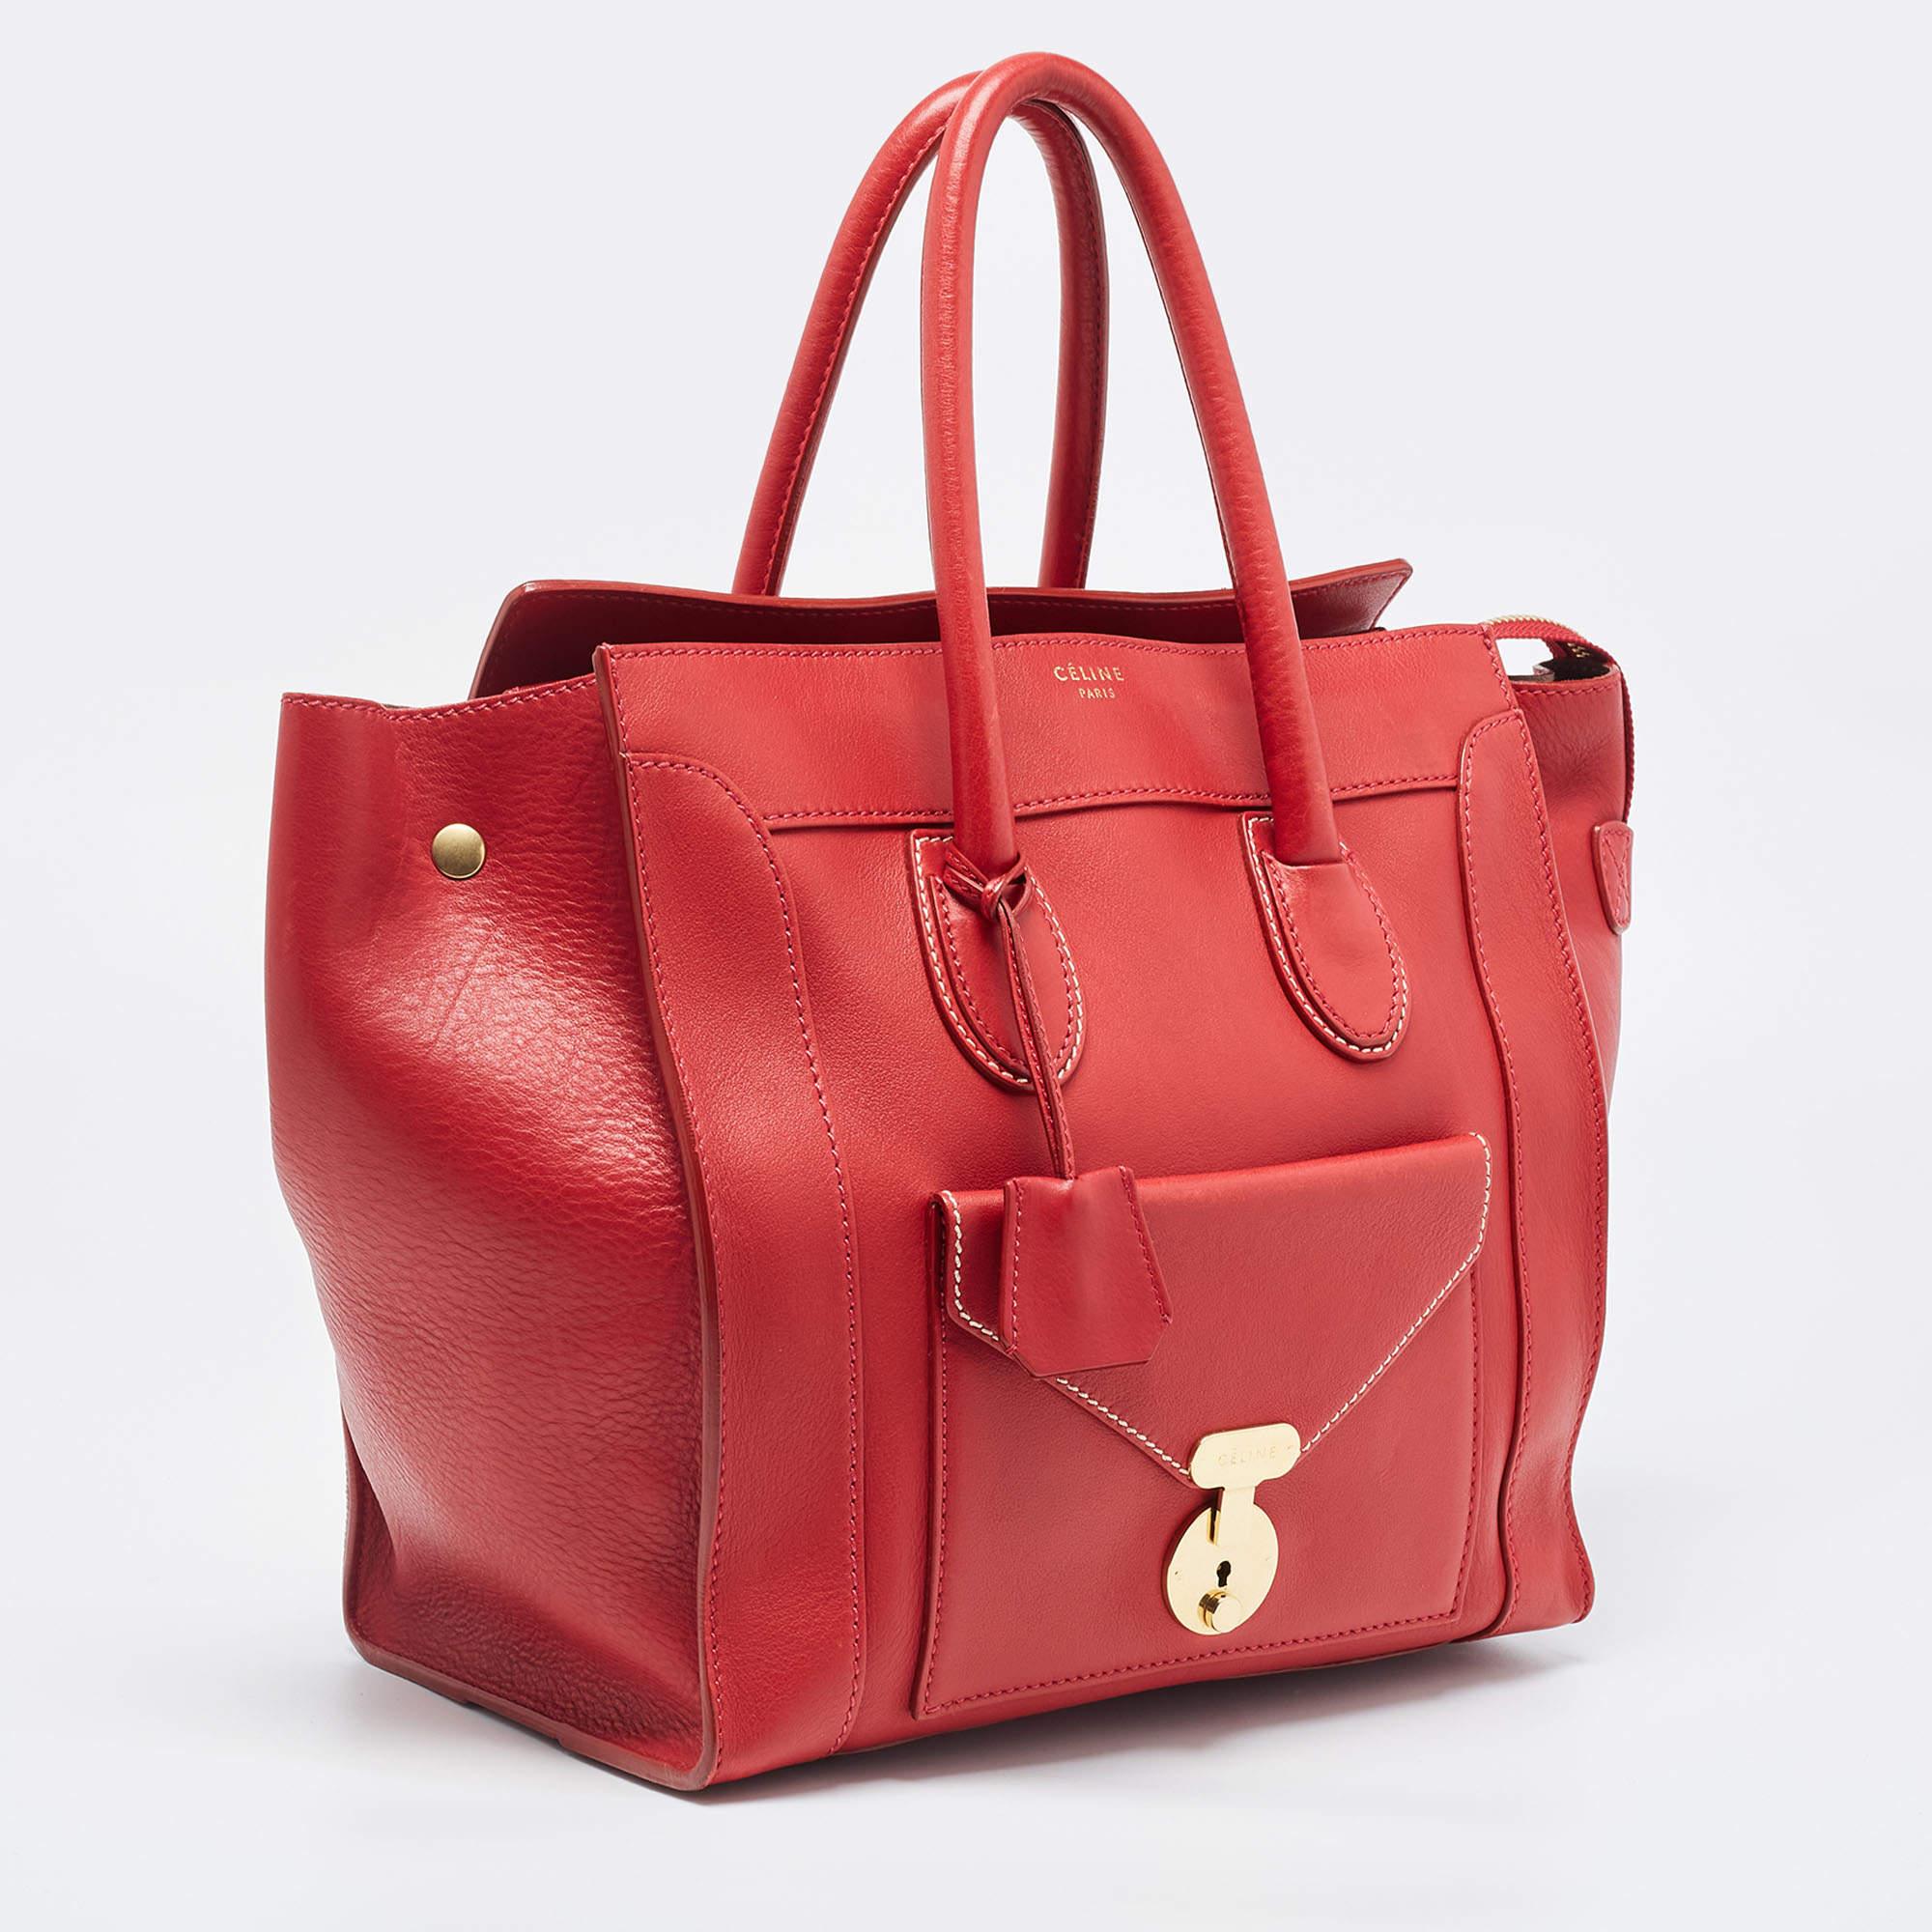 Women's Celine Red Leather Mini Envelope Luggage Tote